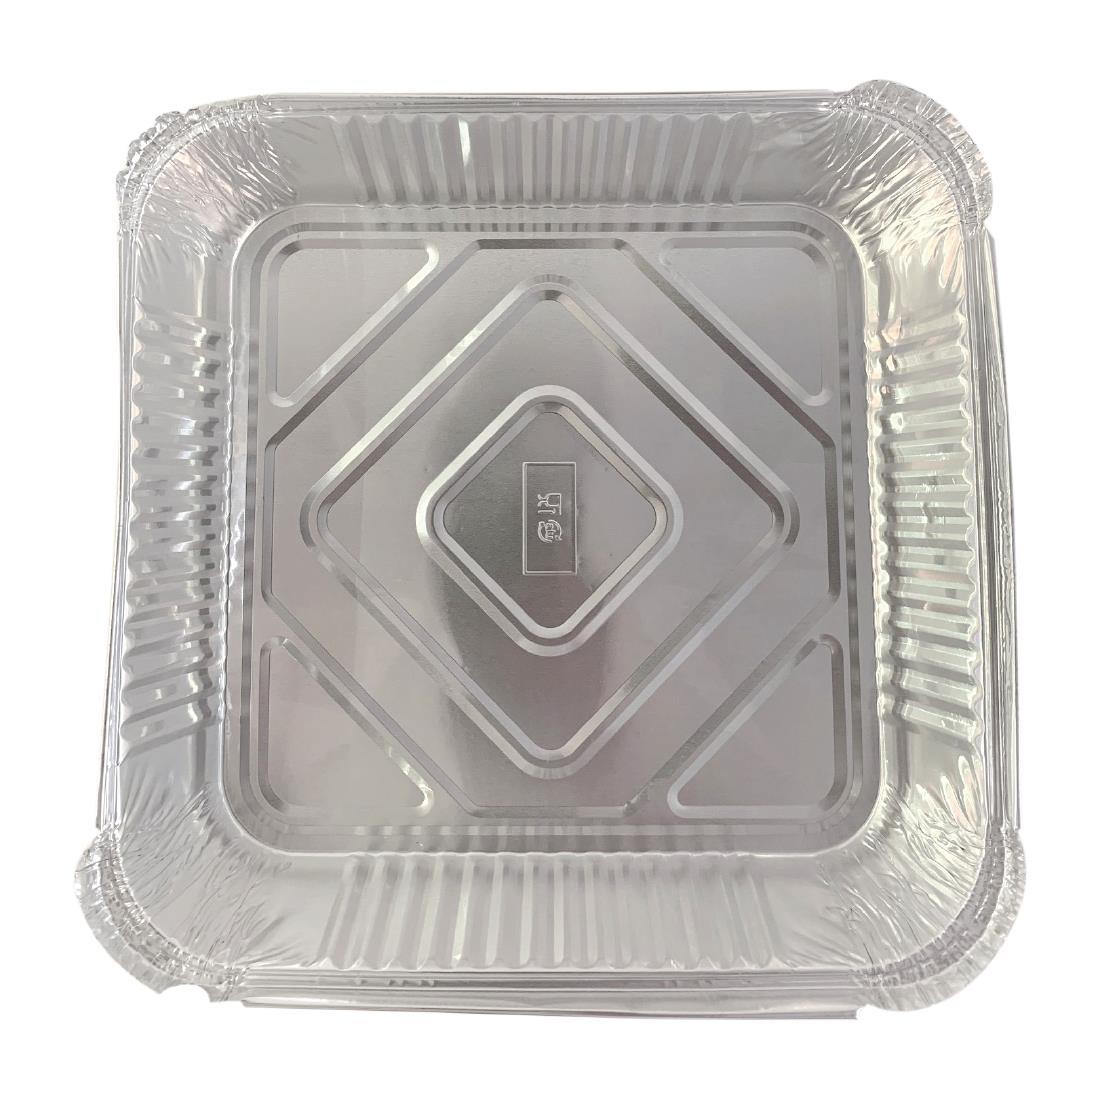 Deep Foil Containers (Pack of 200) - FJ853  - 1